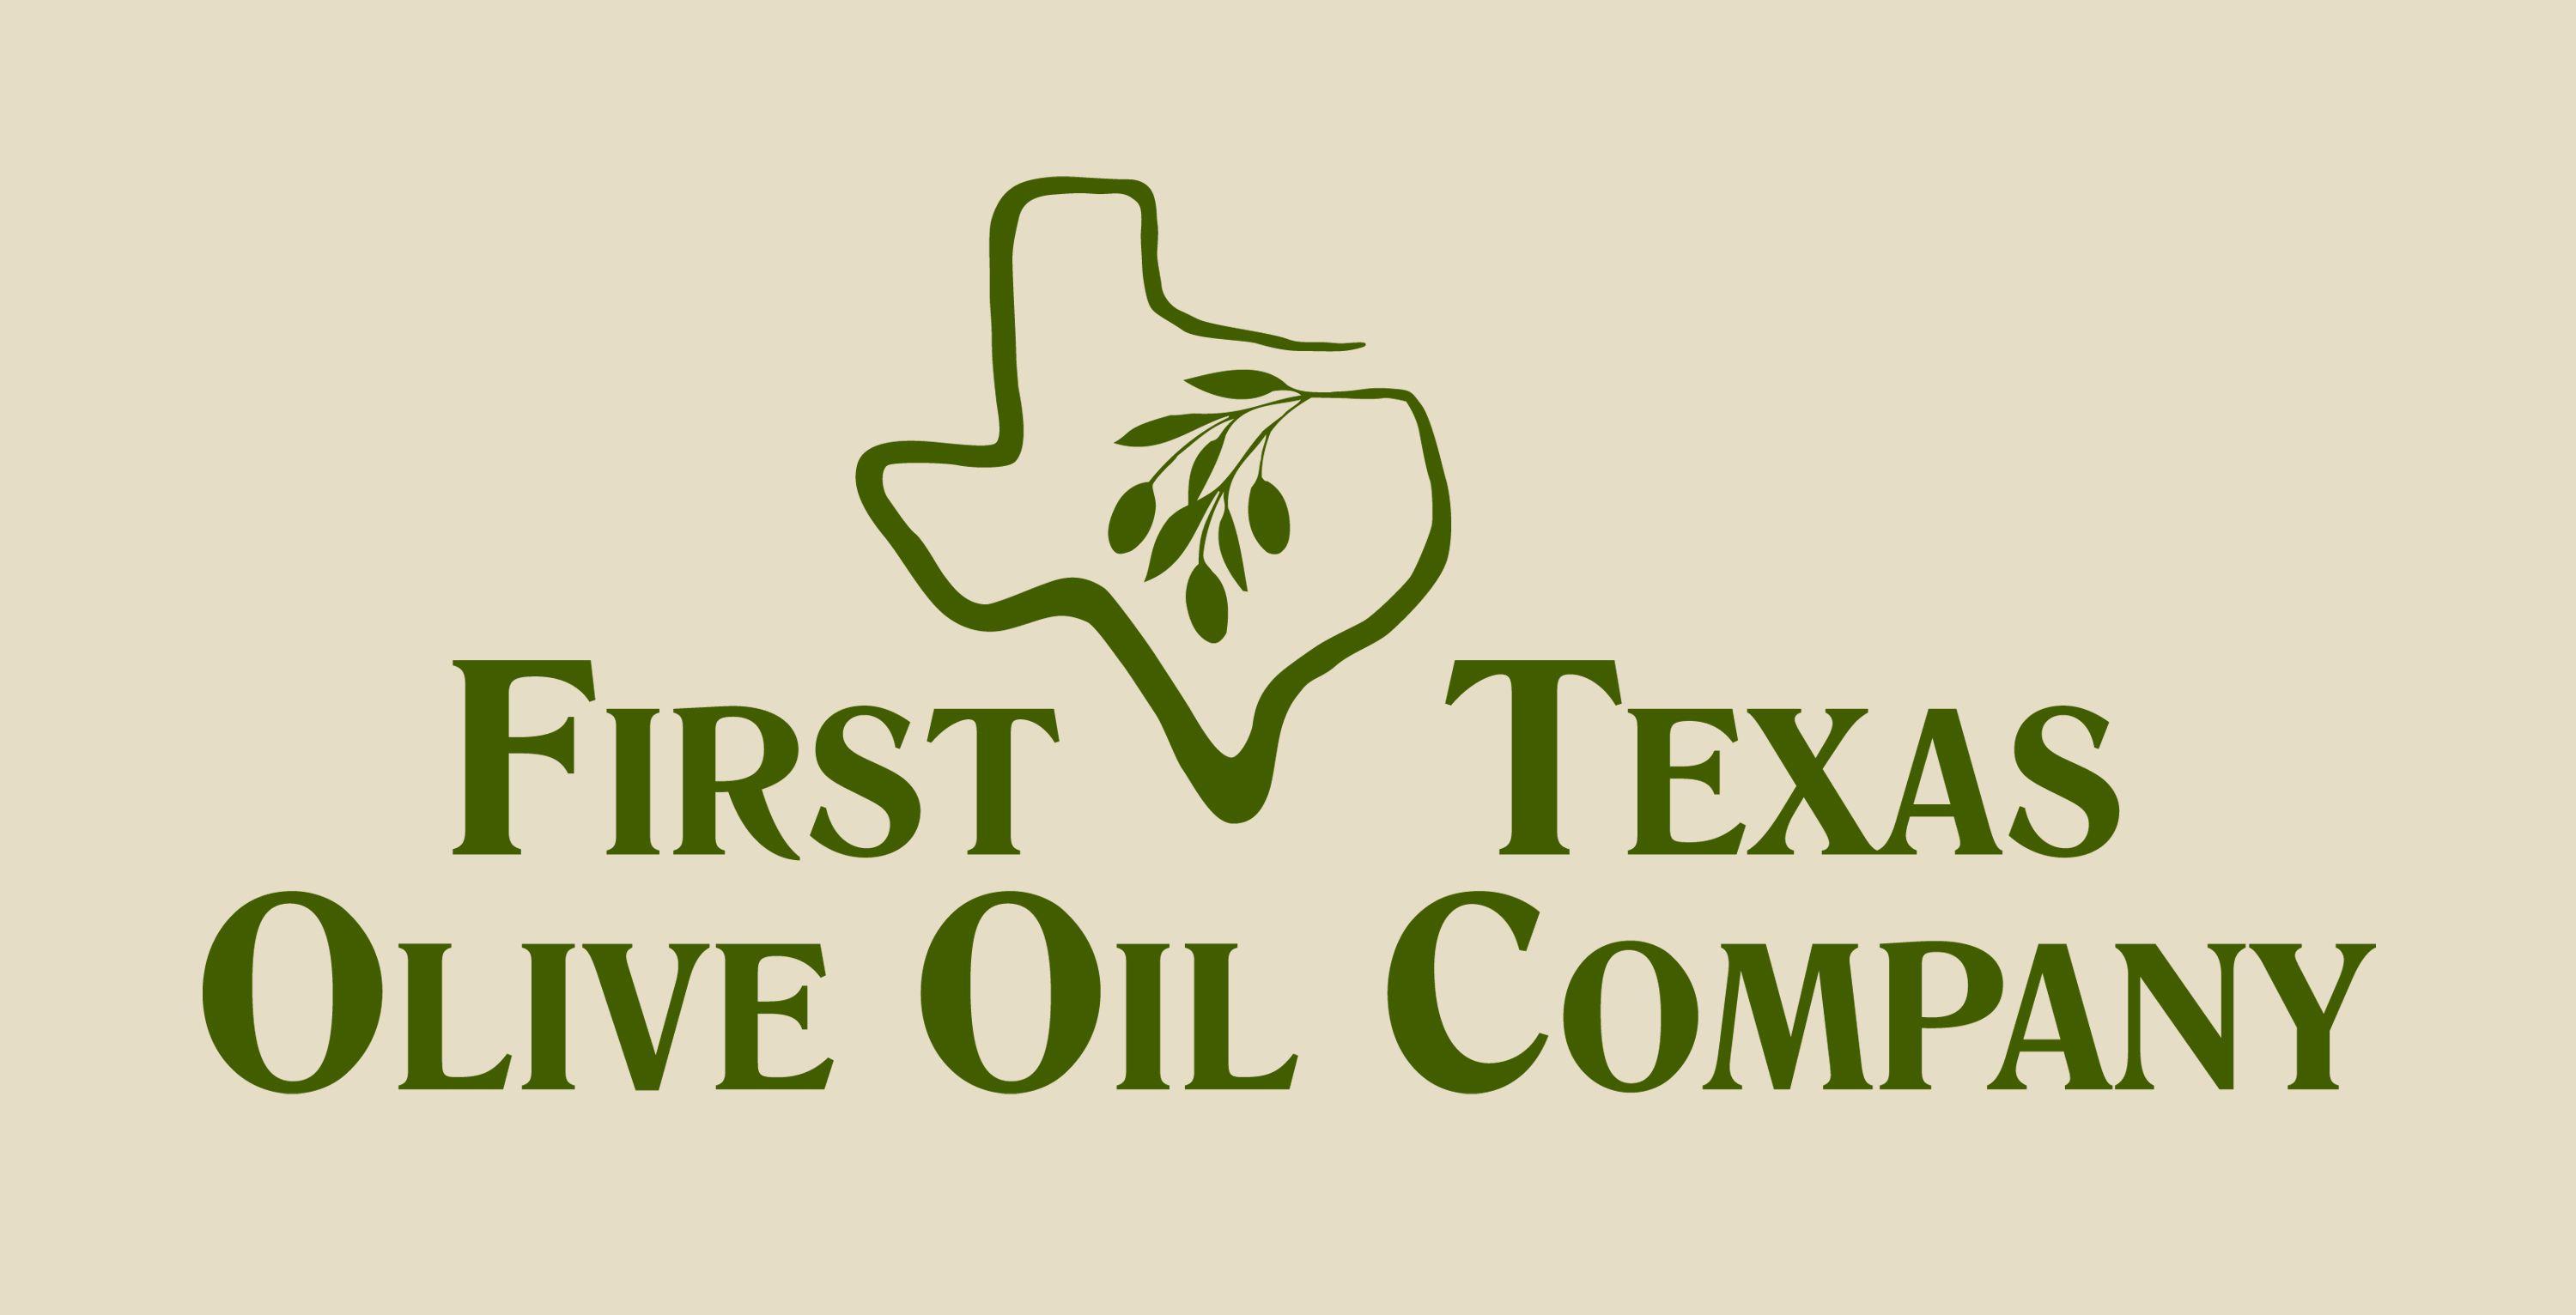 Texas Oil Company Logo - Jeremy Newman. First Texas Olive Oil Company